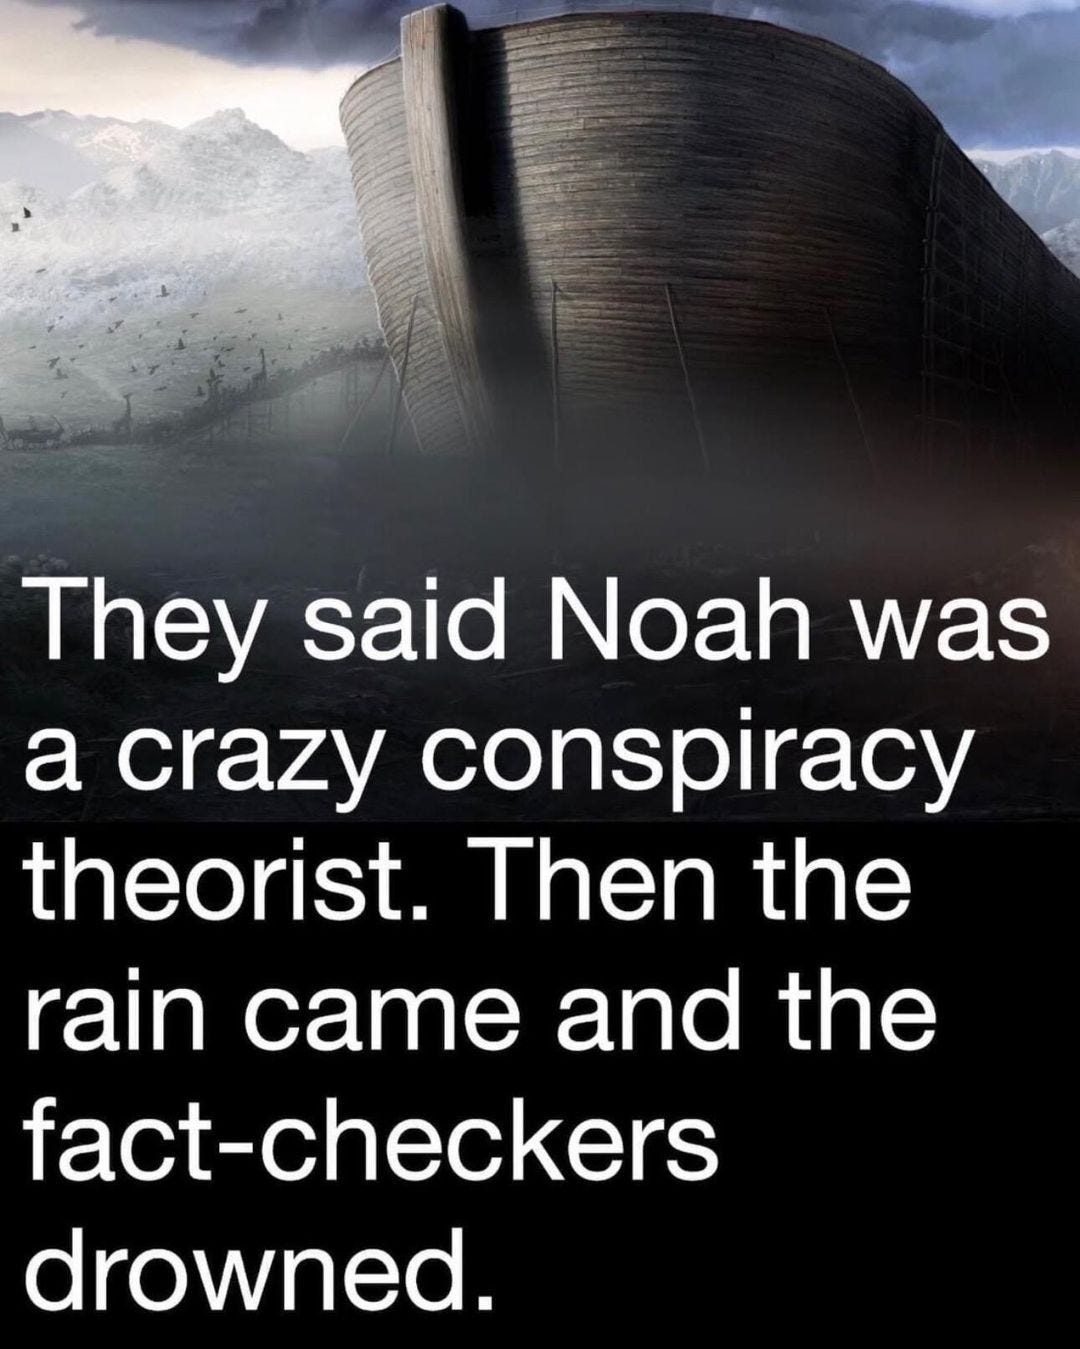 May be an image of text that says 'They said Noah was a crazy conspiracy theorist. Then the rain came and the fact-checkers drowned.'